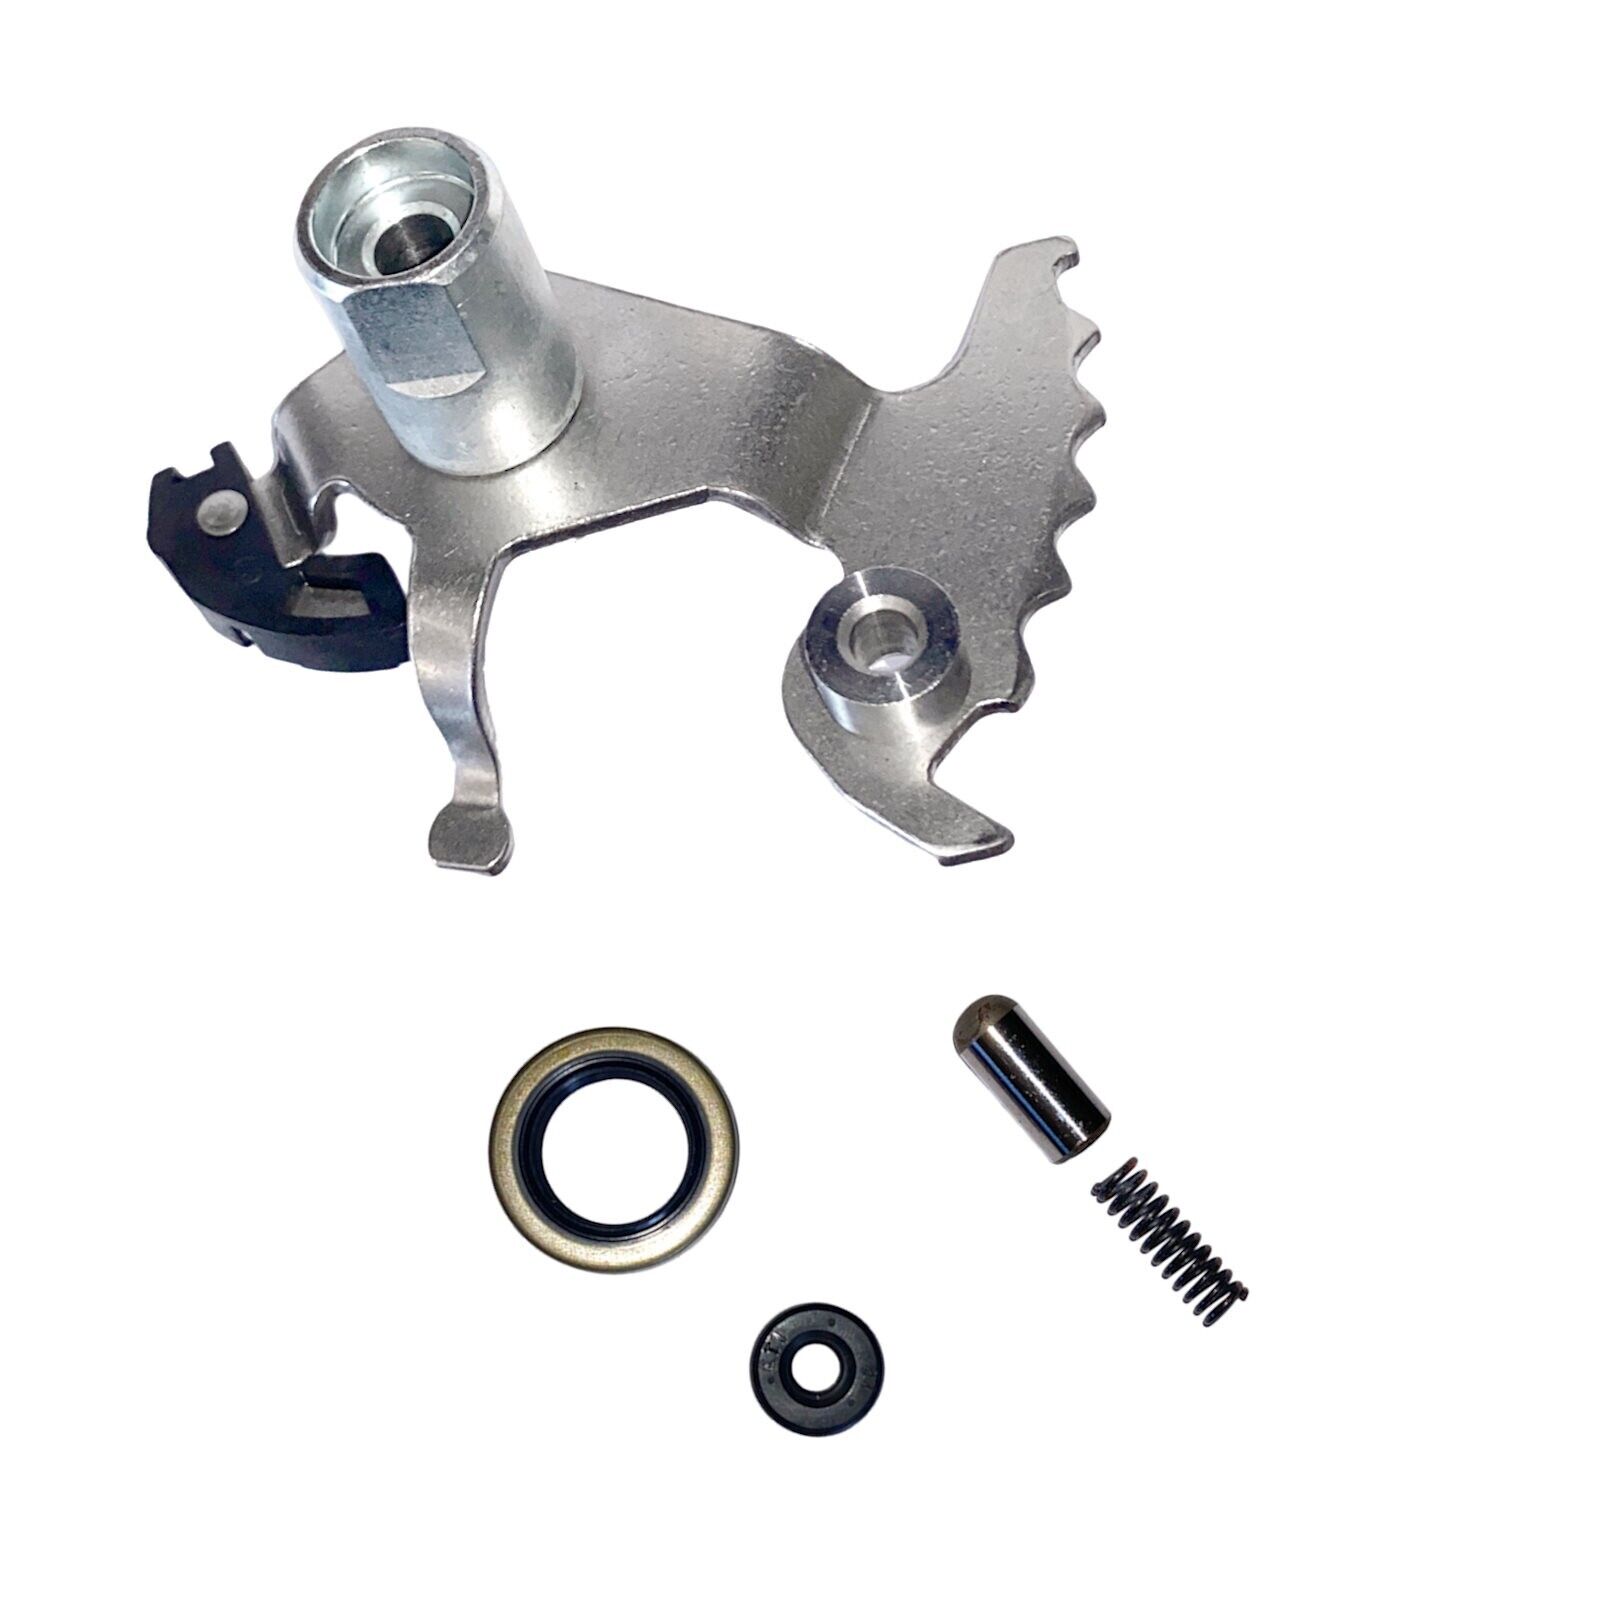 Dodge 48RE Valve Body Rooster Comb with Linkage Seal and Detent Repair Kit 03-10